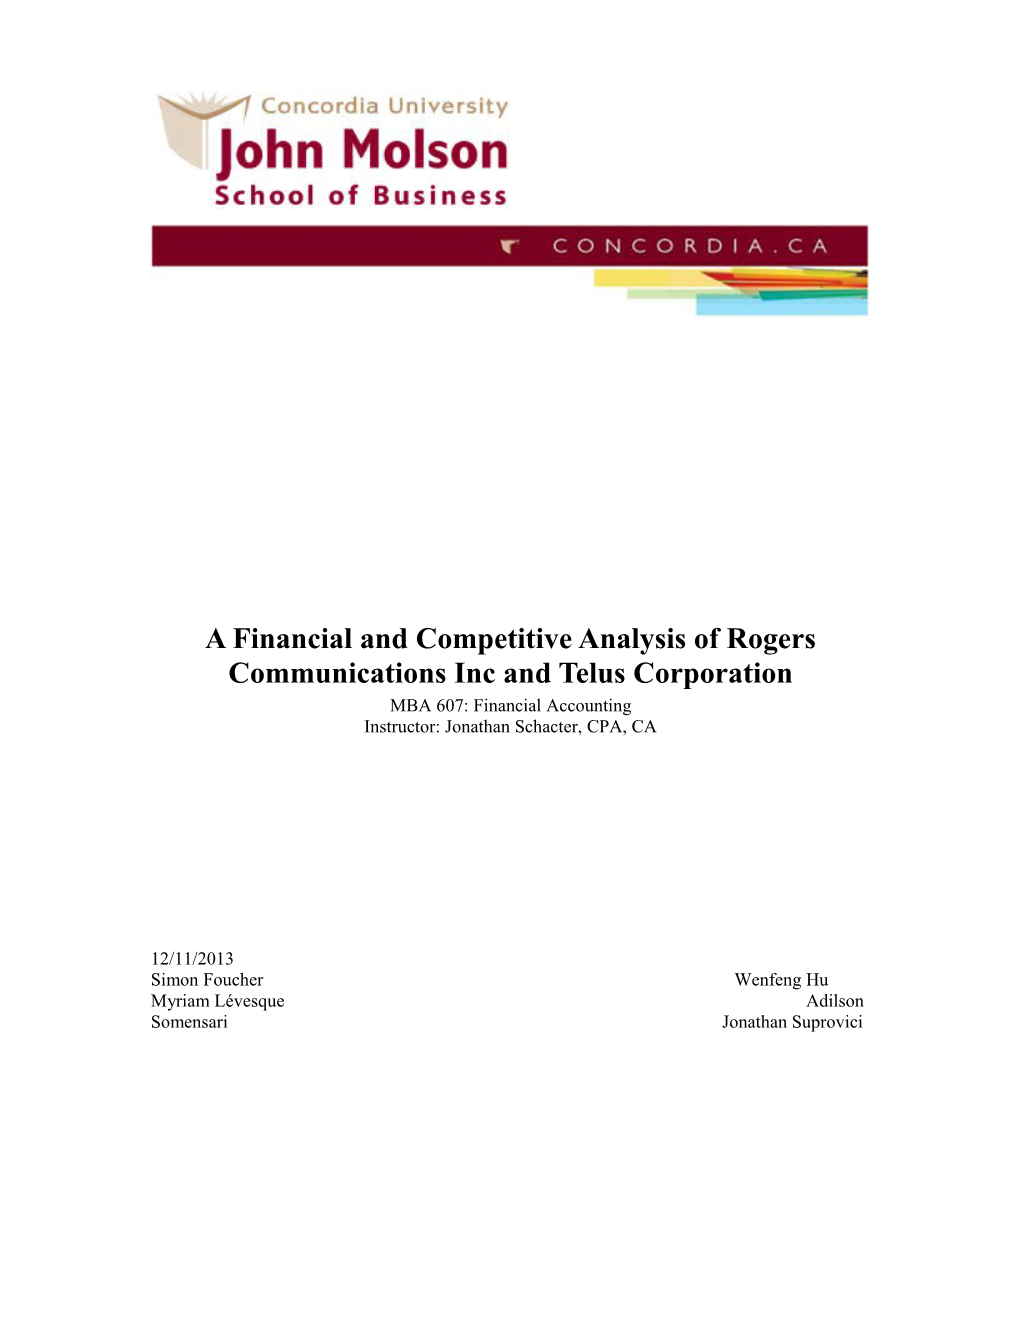 A Financial and Competitive Analysis of Rogers Communications Inc and Telus Corporation